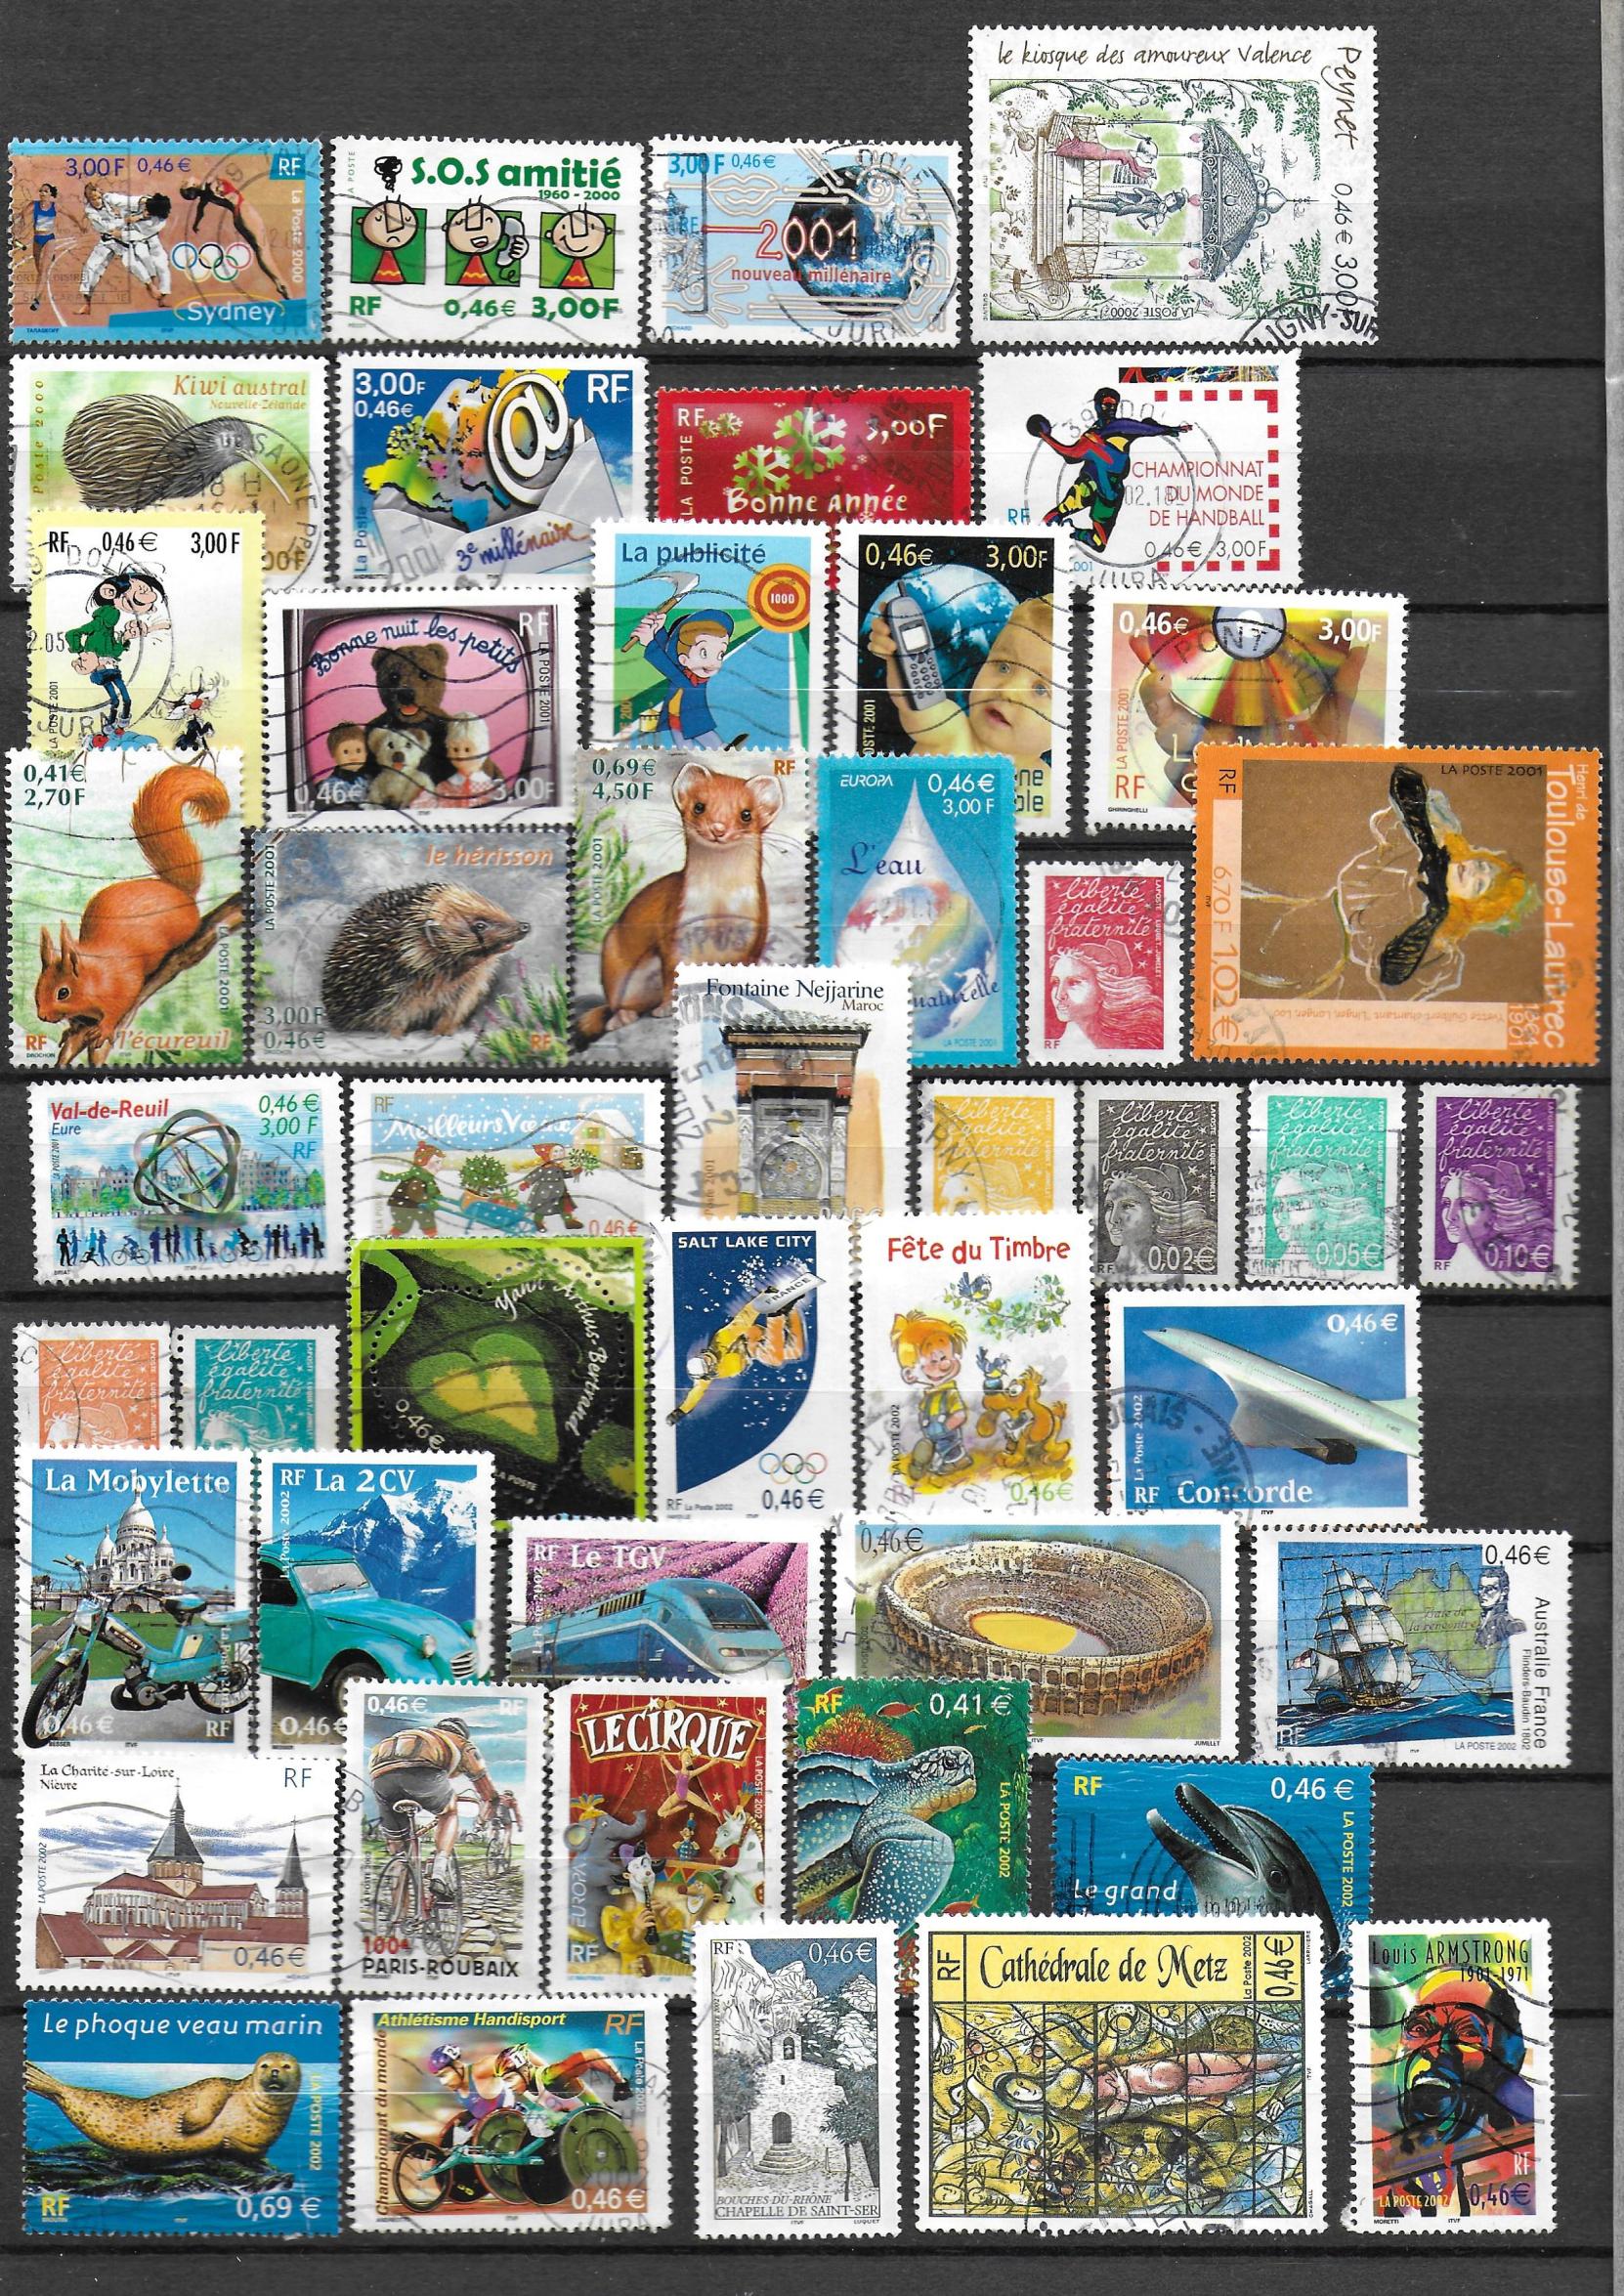 Timbres France 8 - Copie.jpg